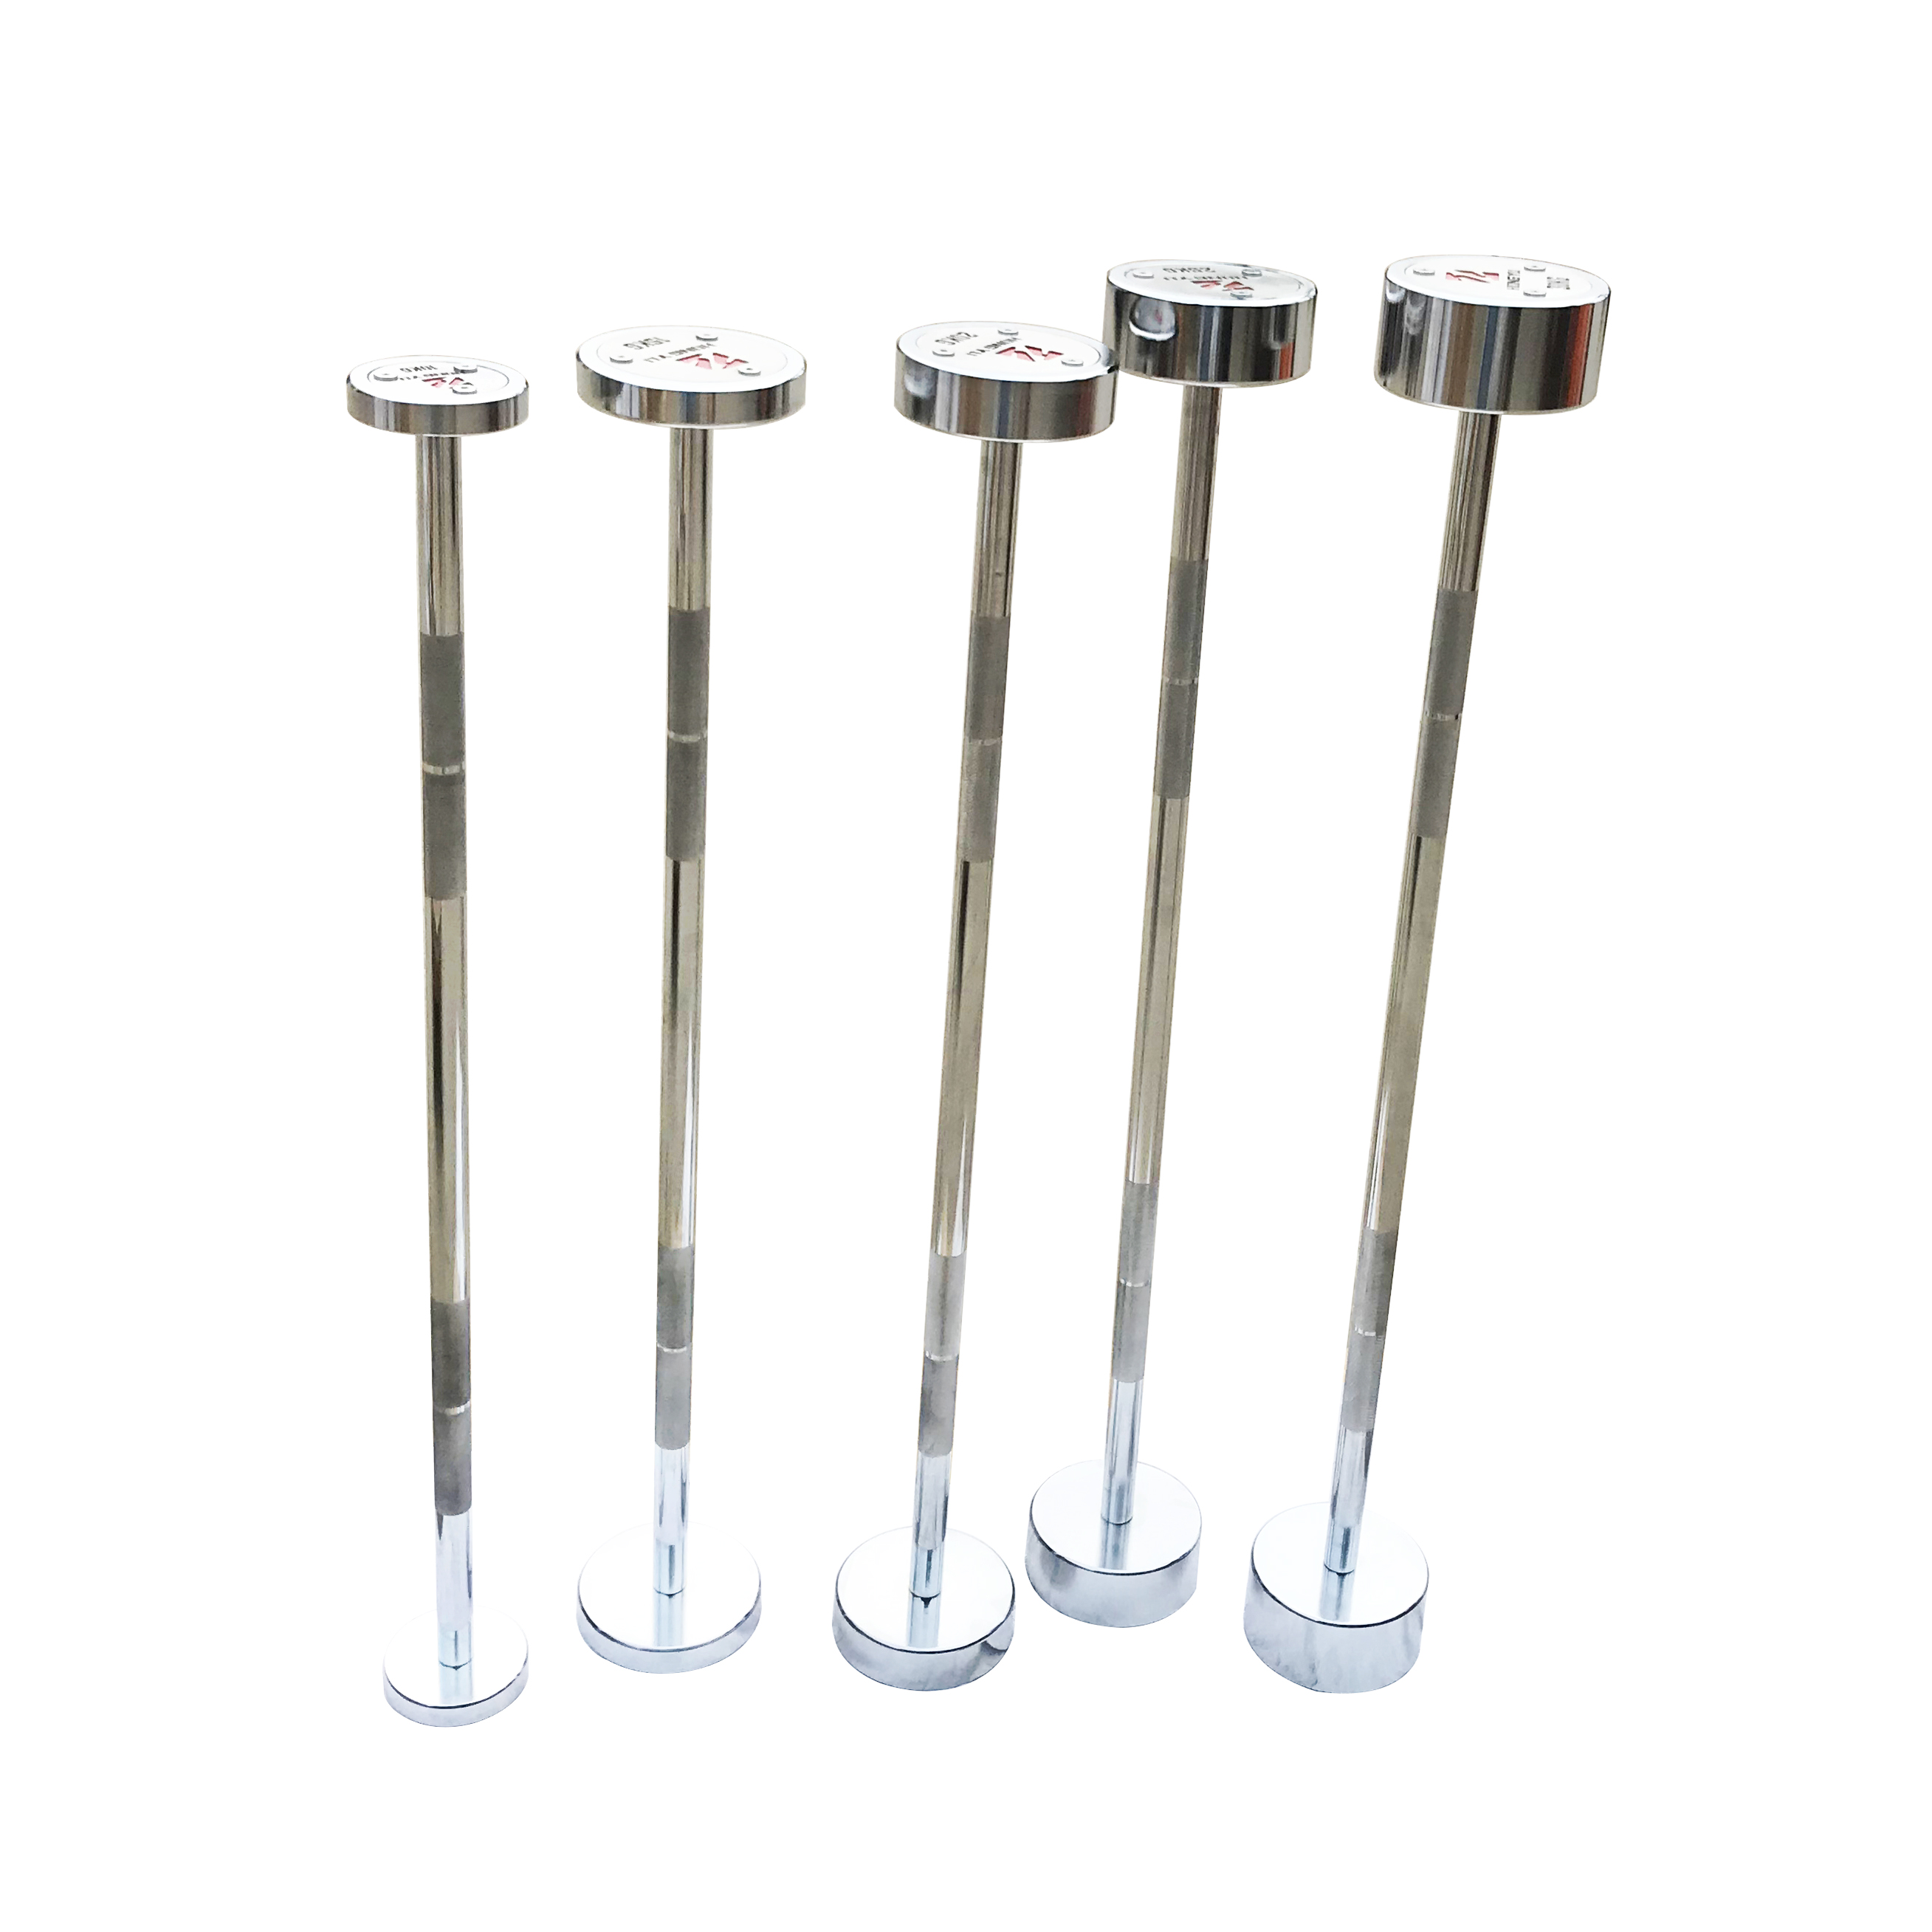 China provided stainless steel straight barbell physical exercise free weightlifting for sale